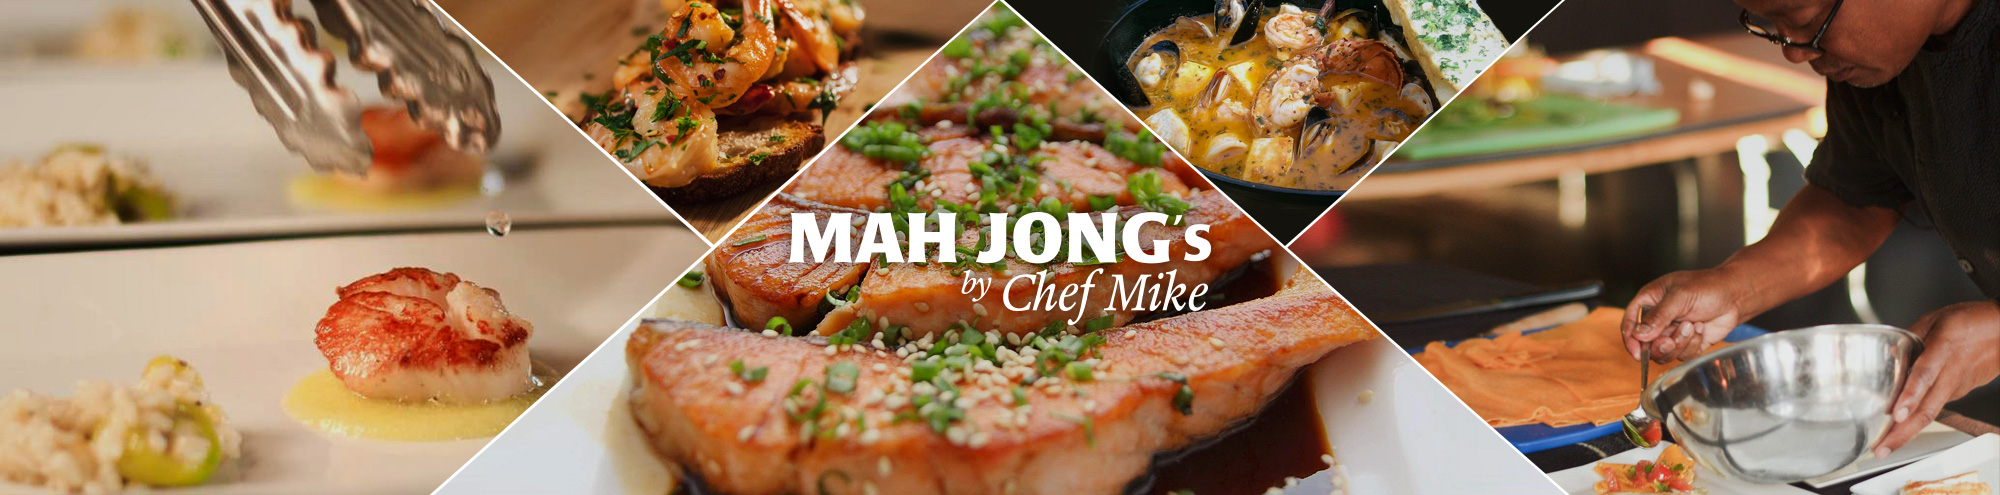 Mah Jong’s By Chef Mike